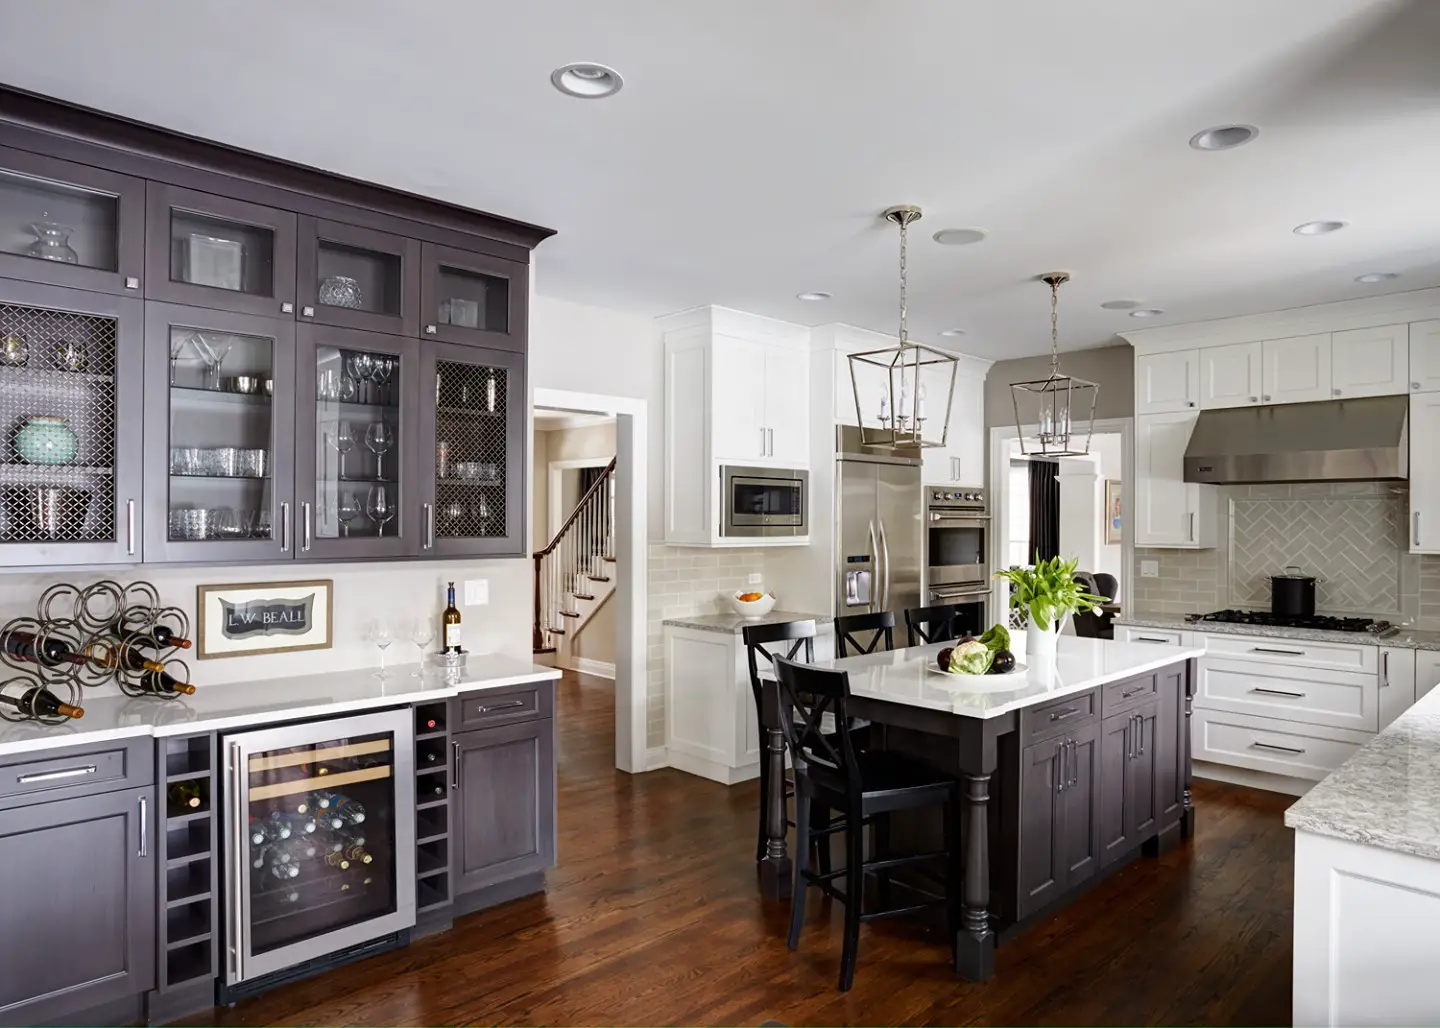 A kitchen with white cabinets and an auto draft.